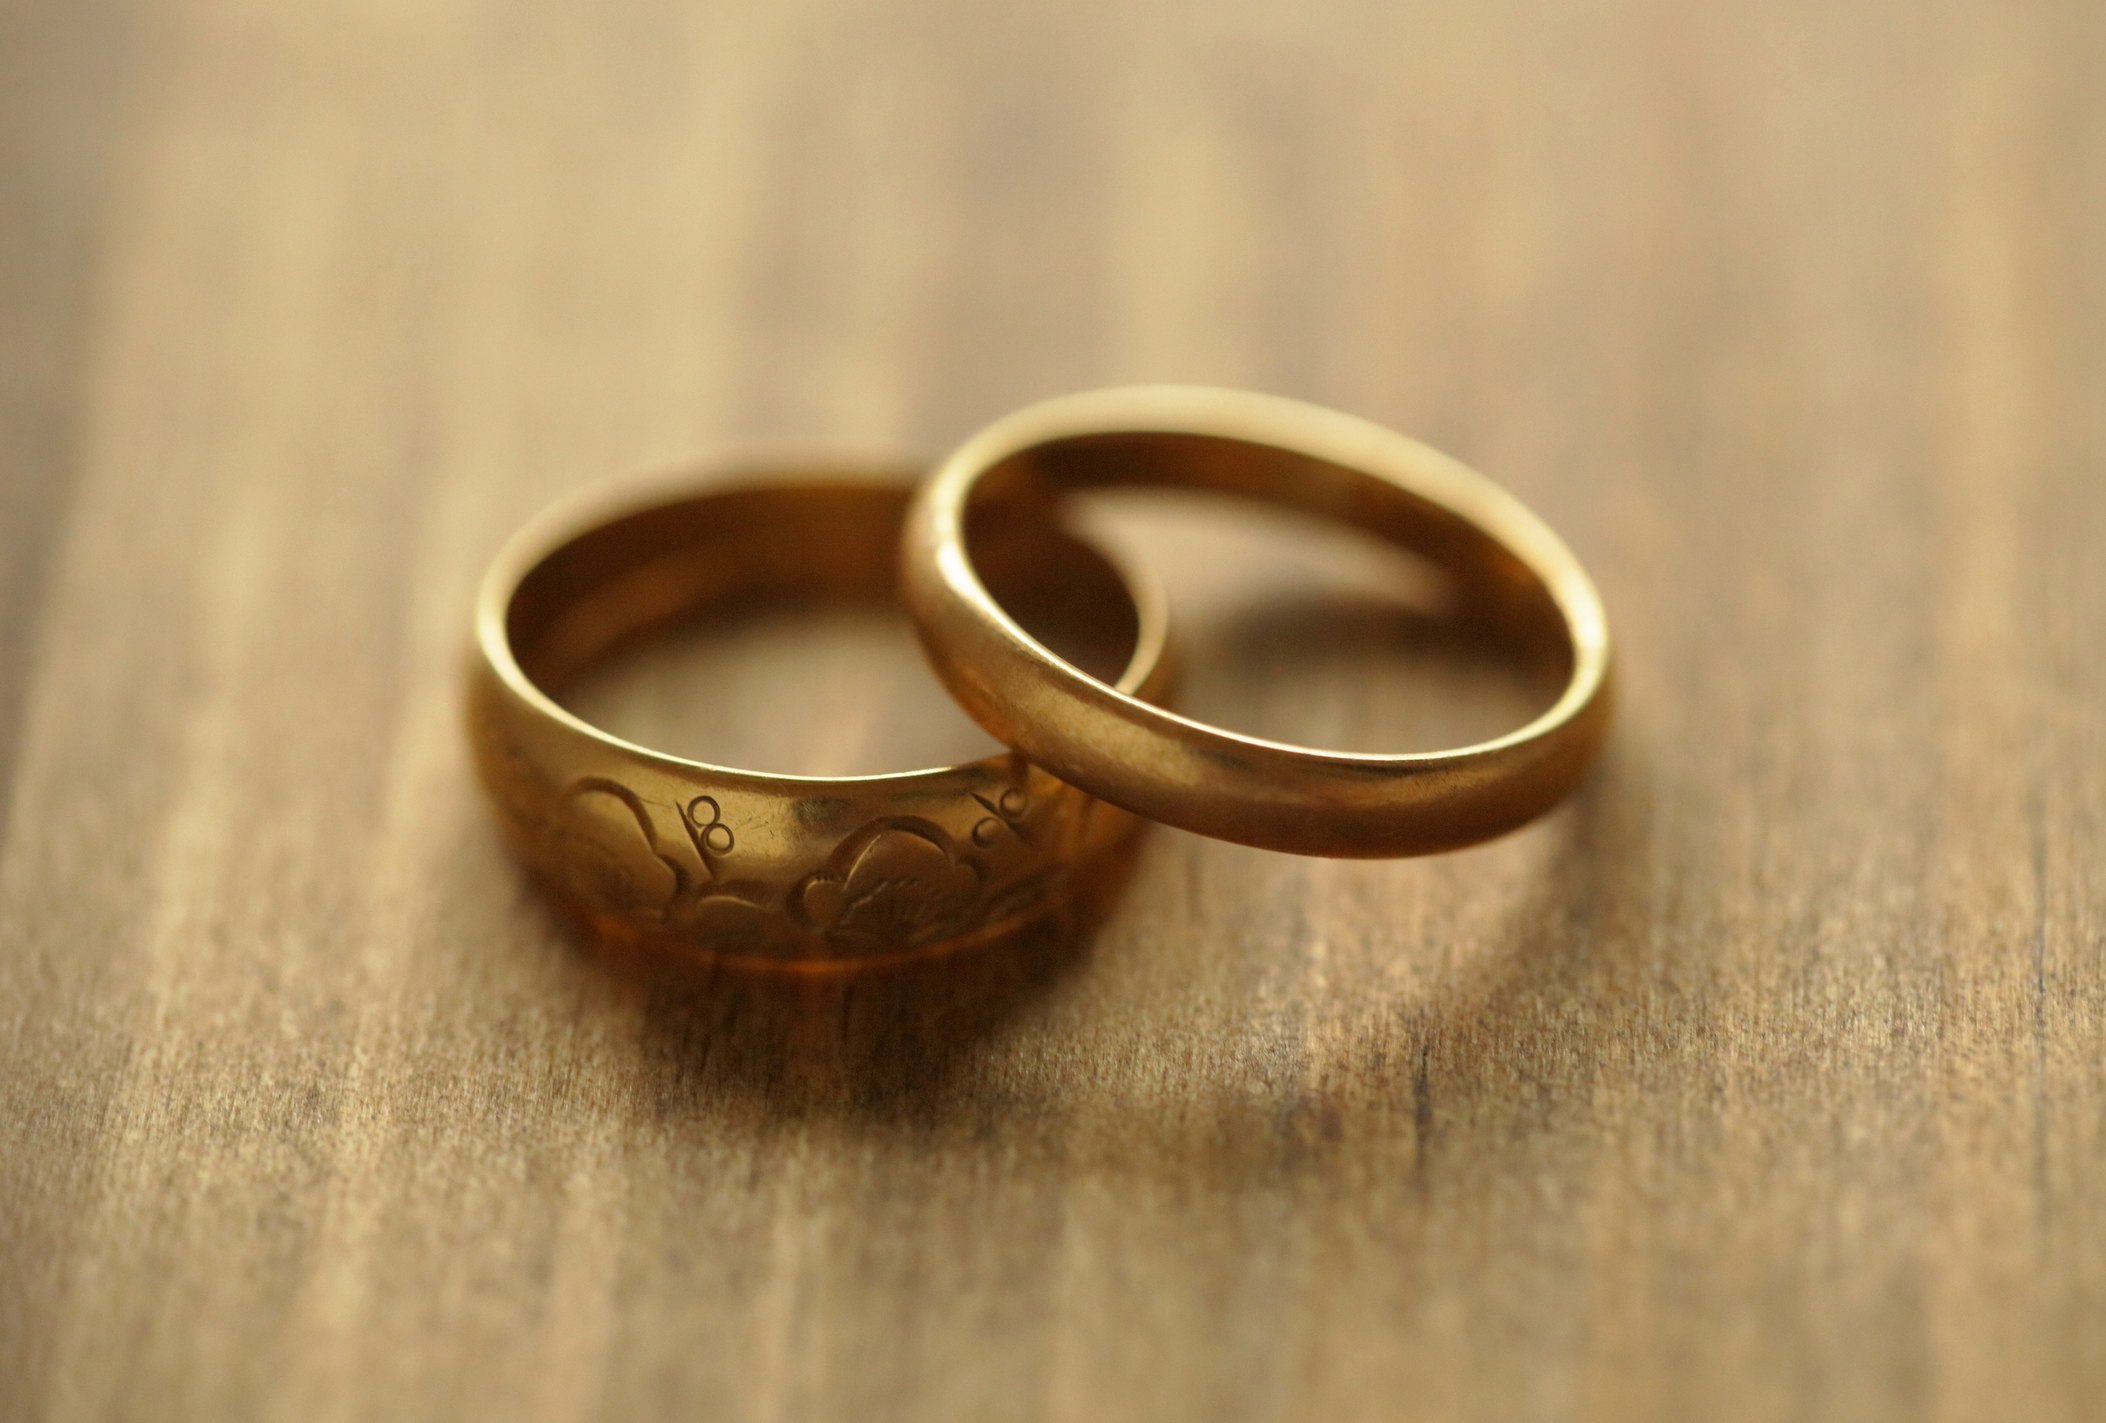 Two wedding bands on a wooden surface